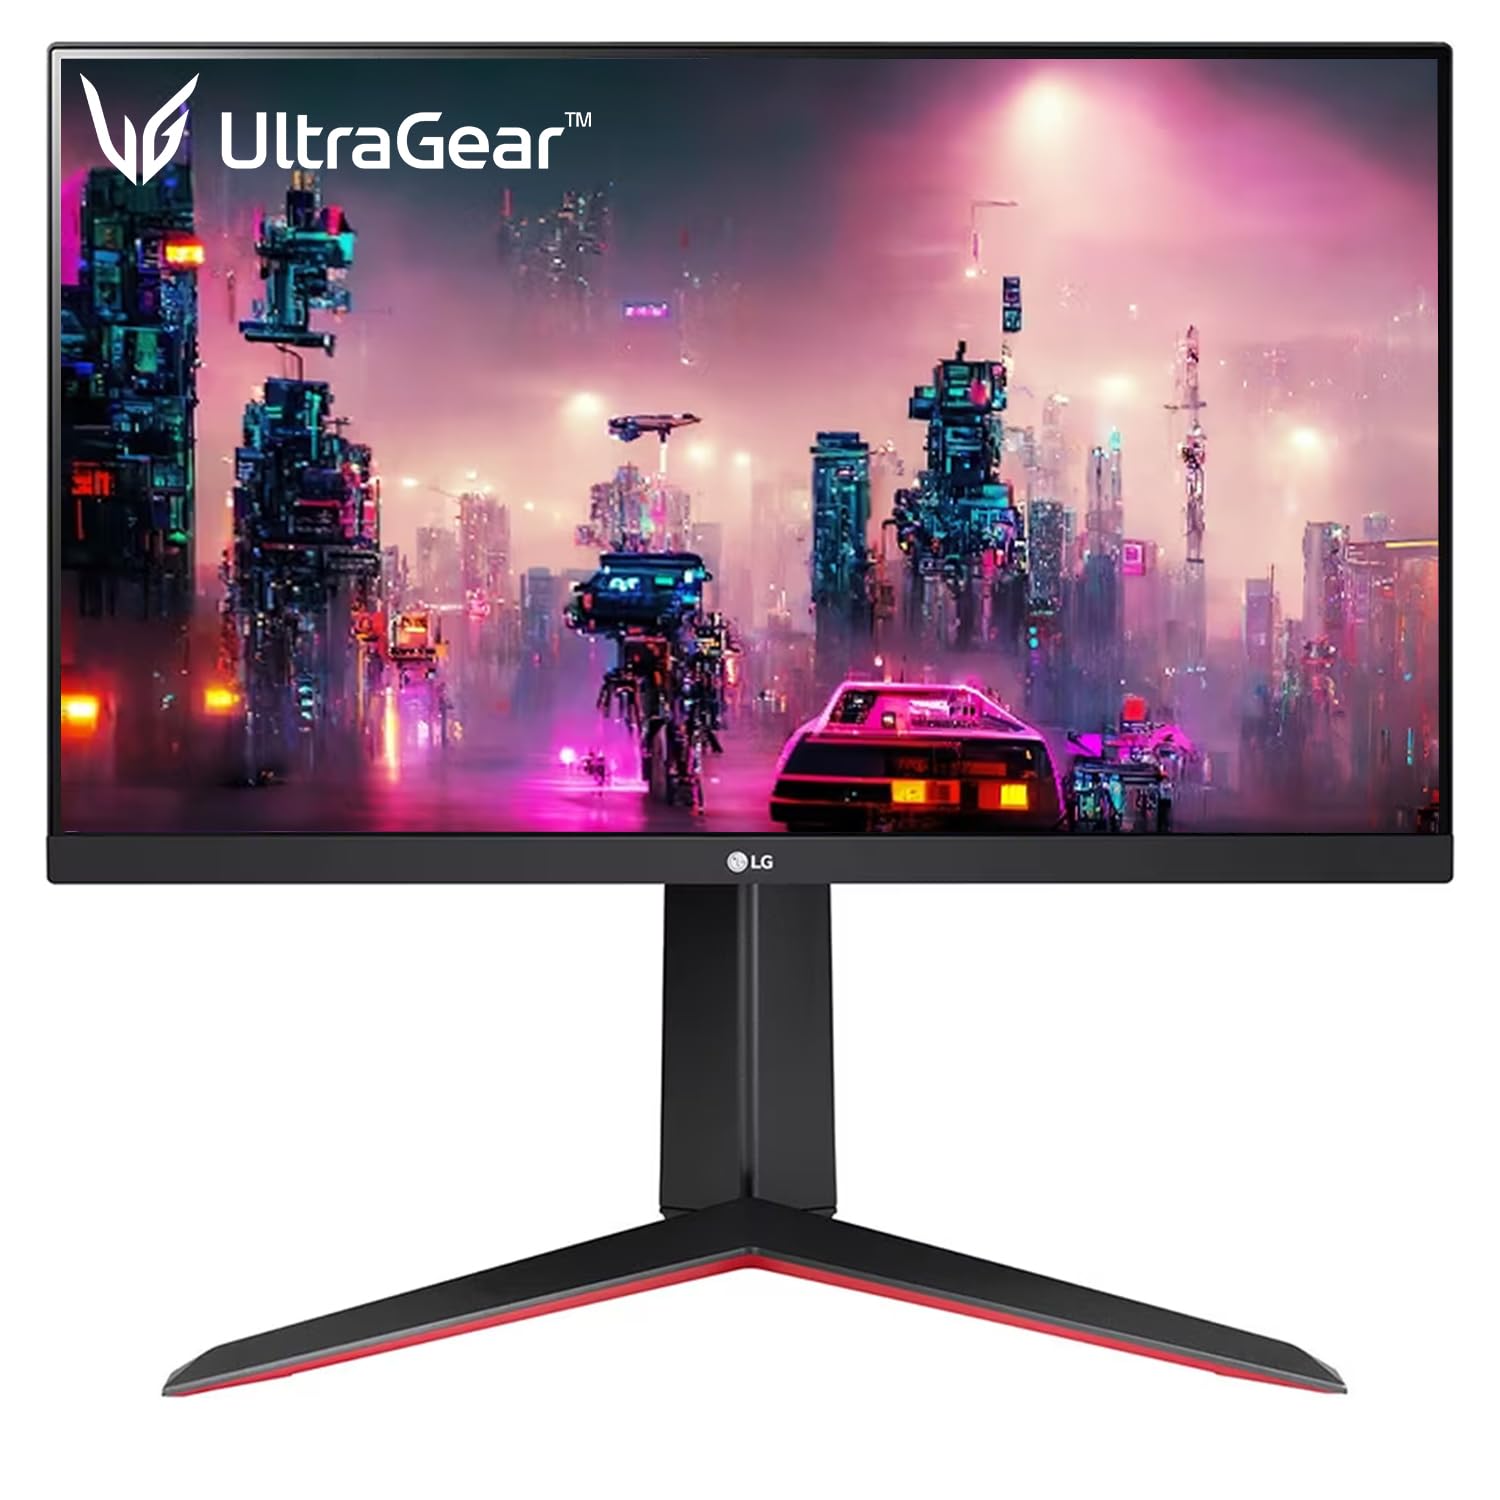 Best Monitor under 15000: A Comprehensive Guide for Smart Shoppers